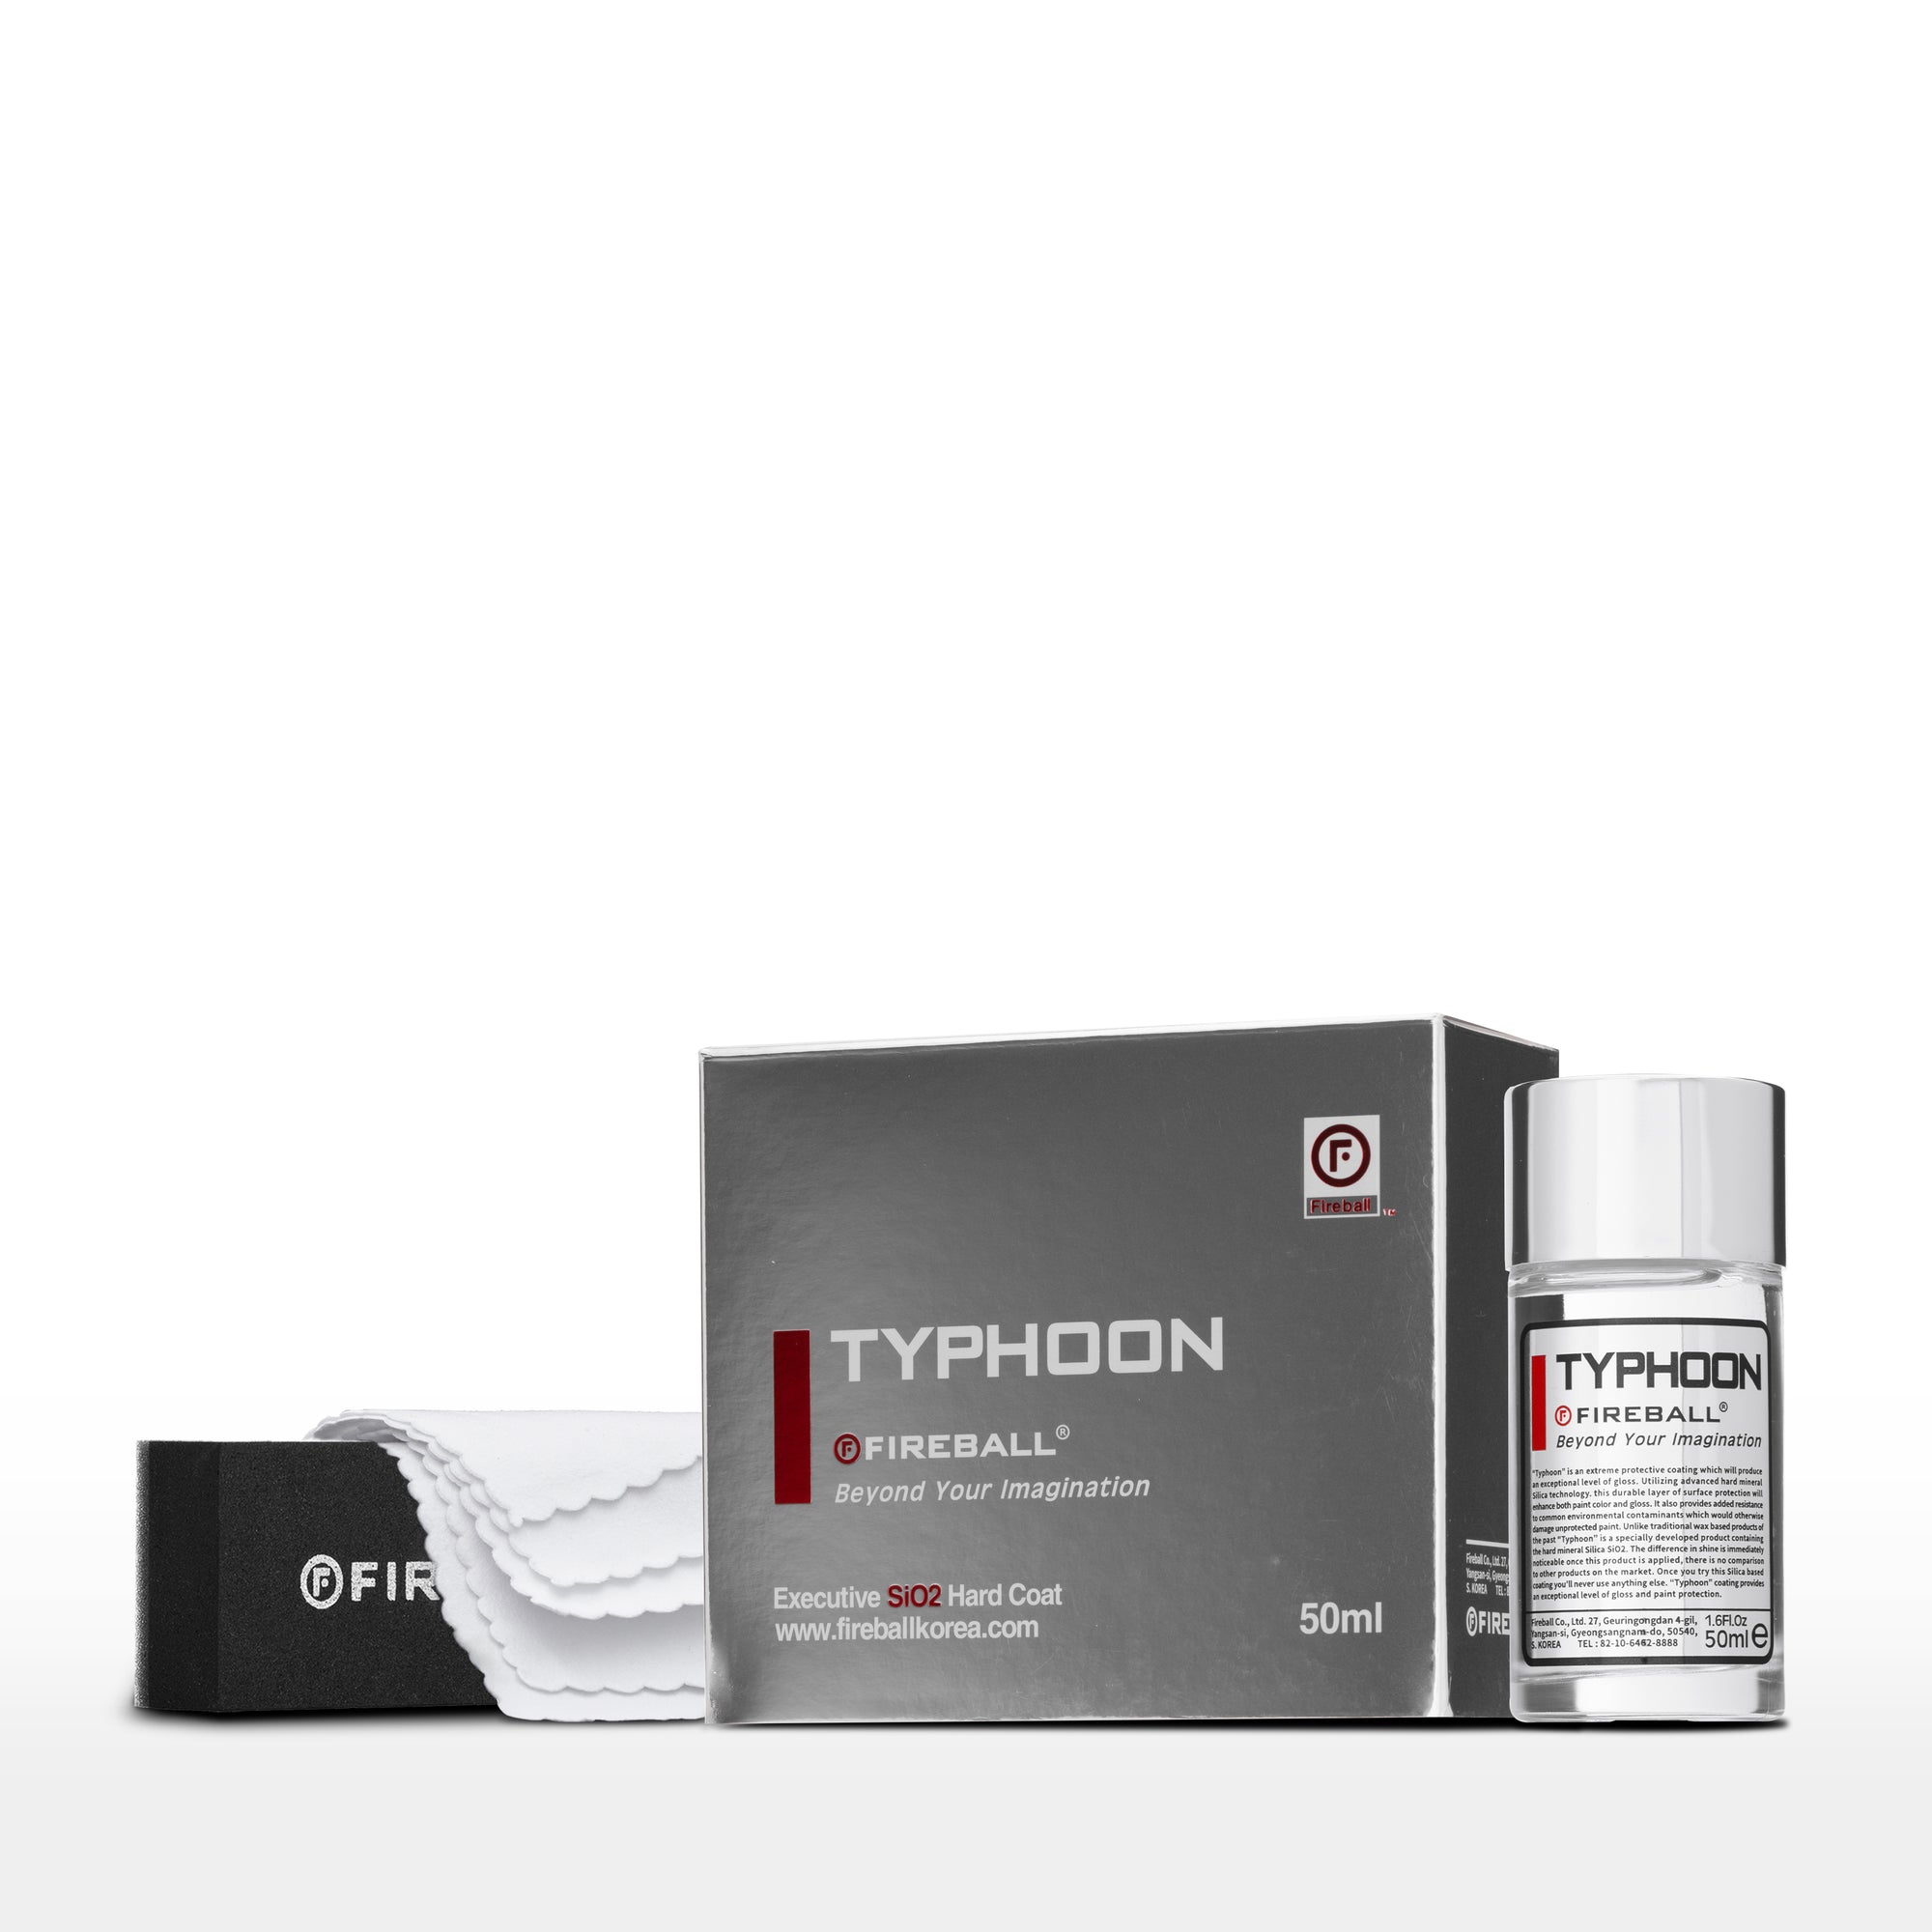 Fireball Typhoon 50mL - Super-Hydrophobic Top Coat (Professional Authorized Only, contact us for access)